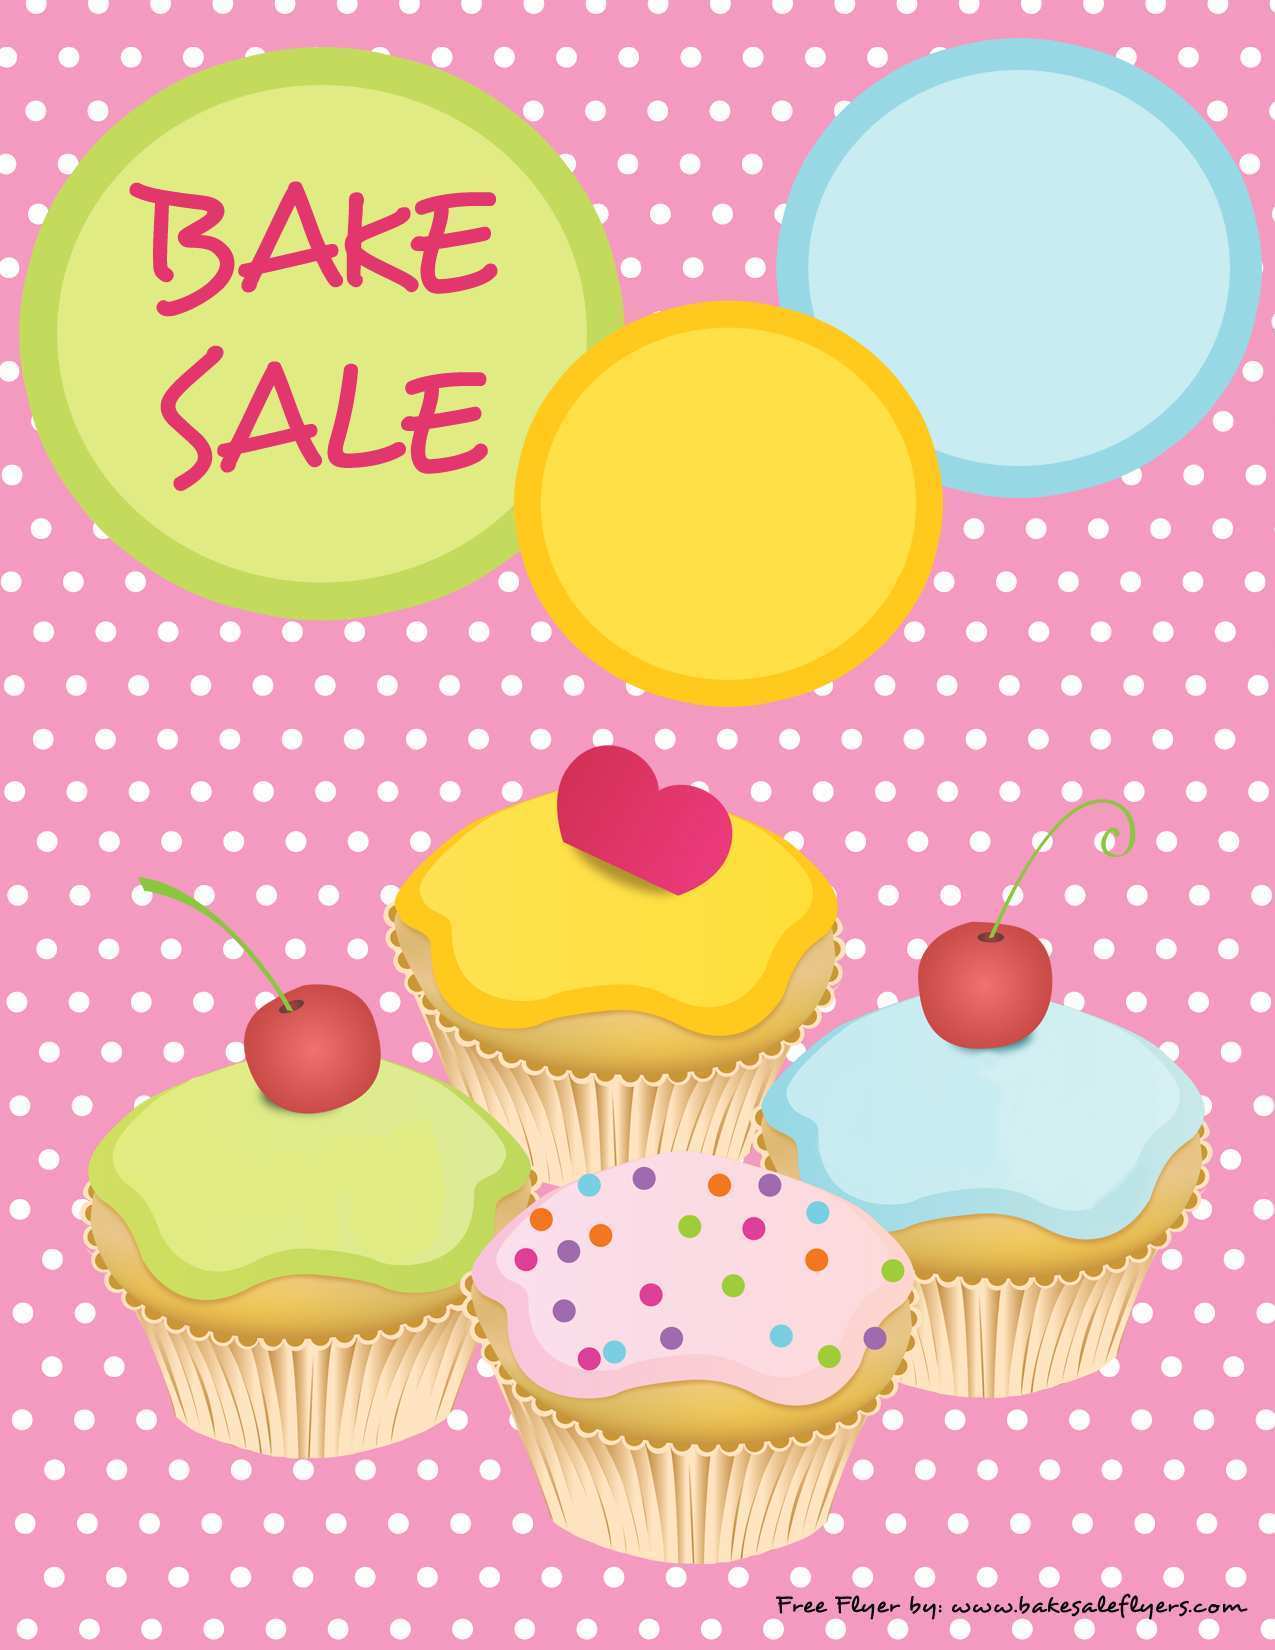 97 Creating Bake Sale Flyer Template Word Templates With Bake Sale Flyer Template Word Cards Design Templates